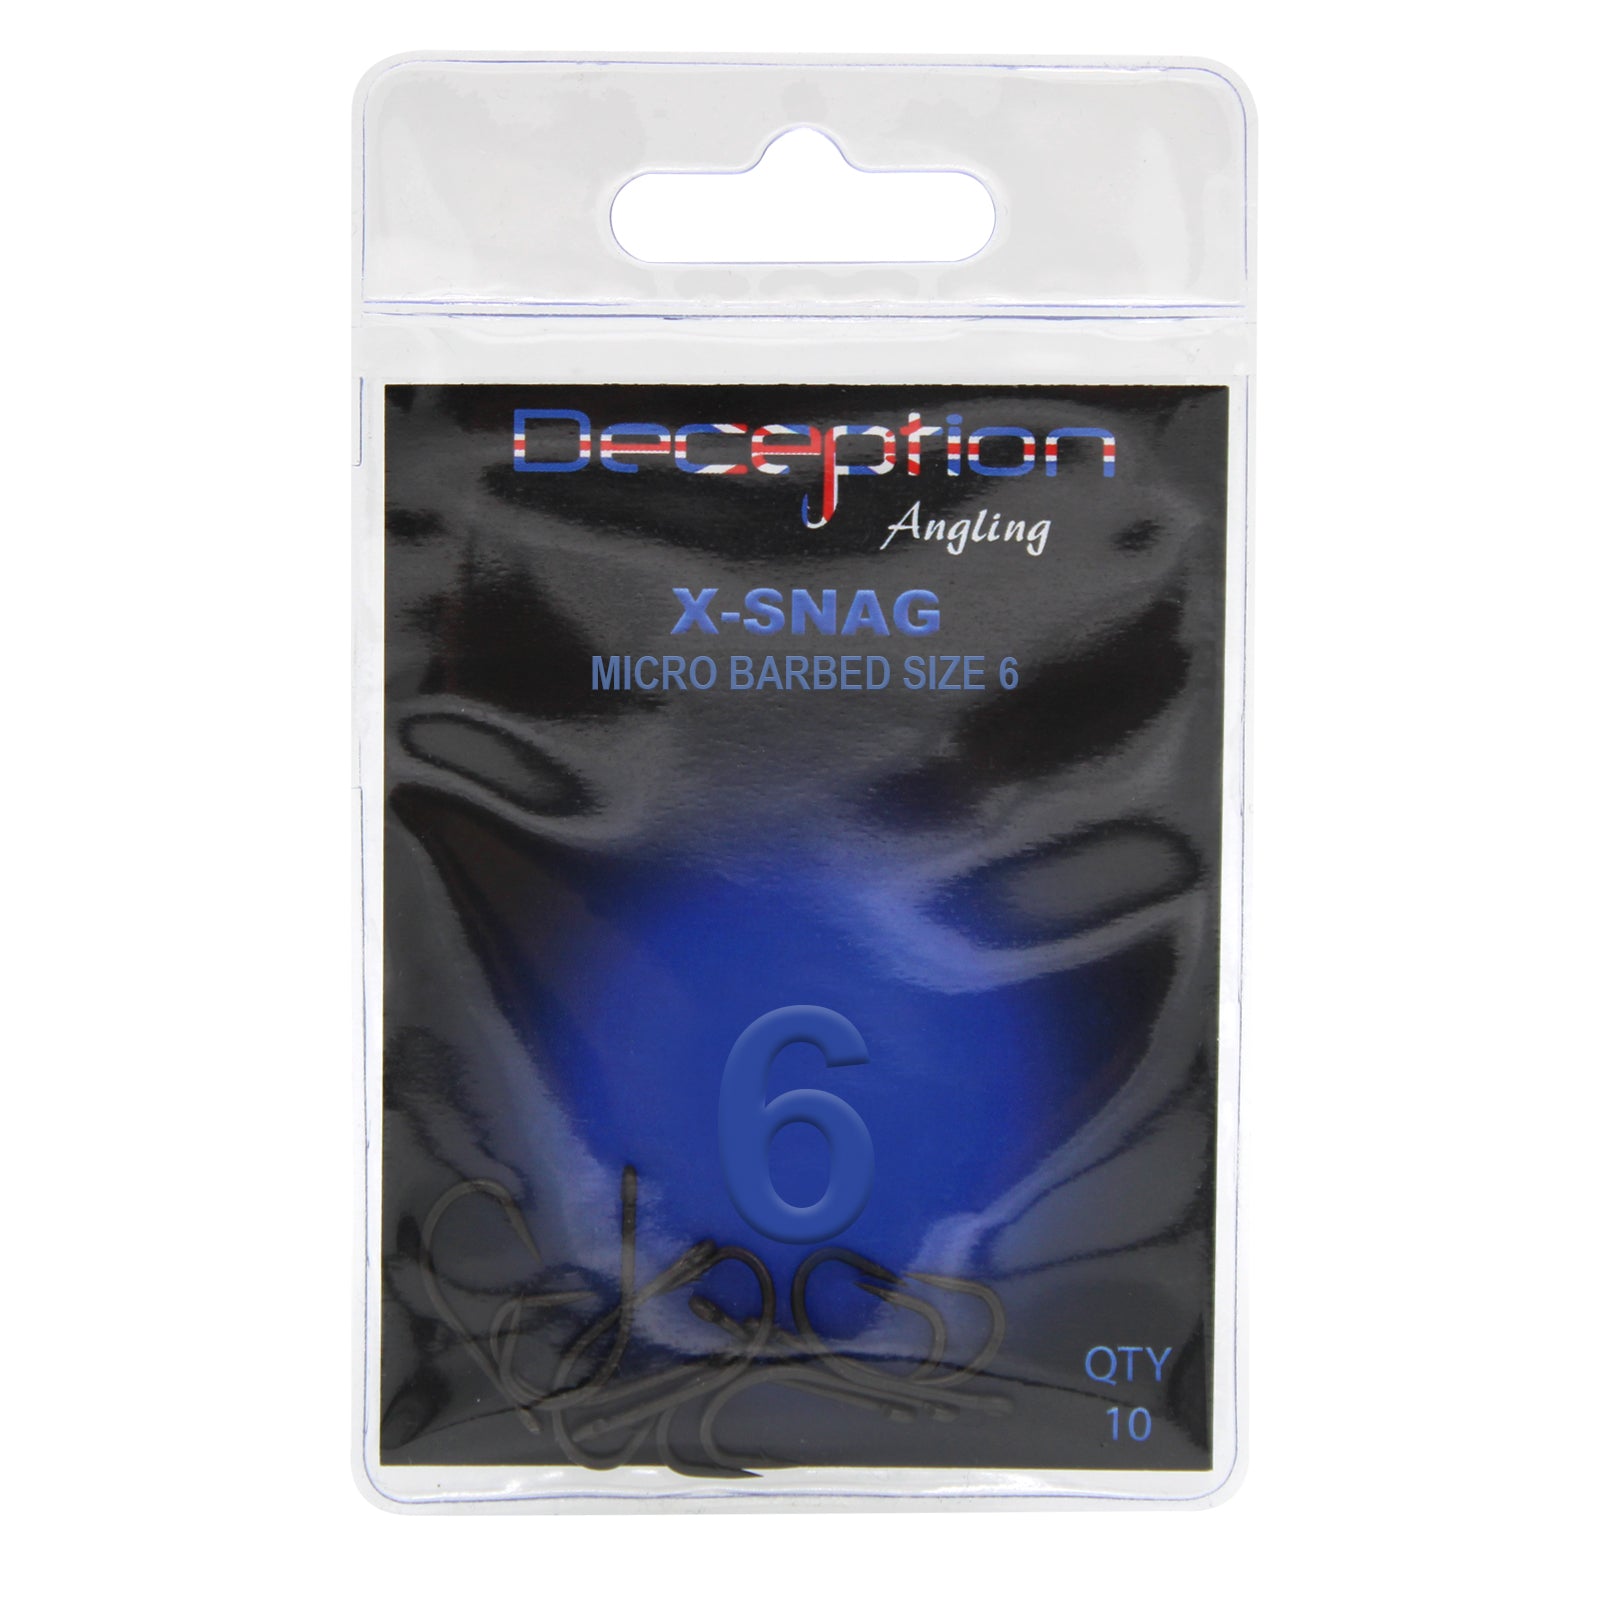 Deception Angling X-Snag Micro Barbed Fishing Hooks Size 6 Pack of 10